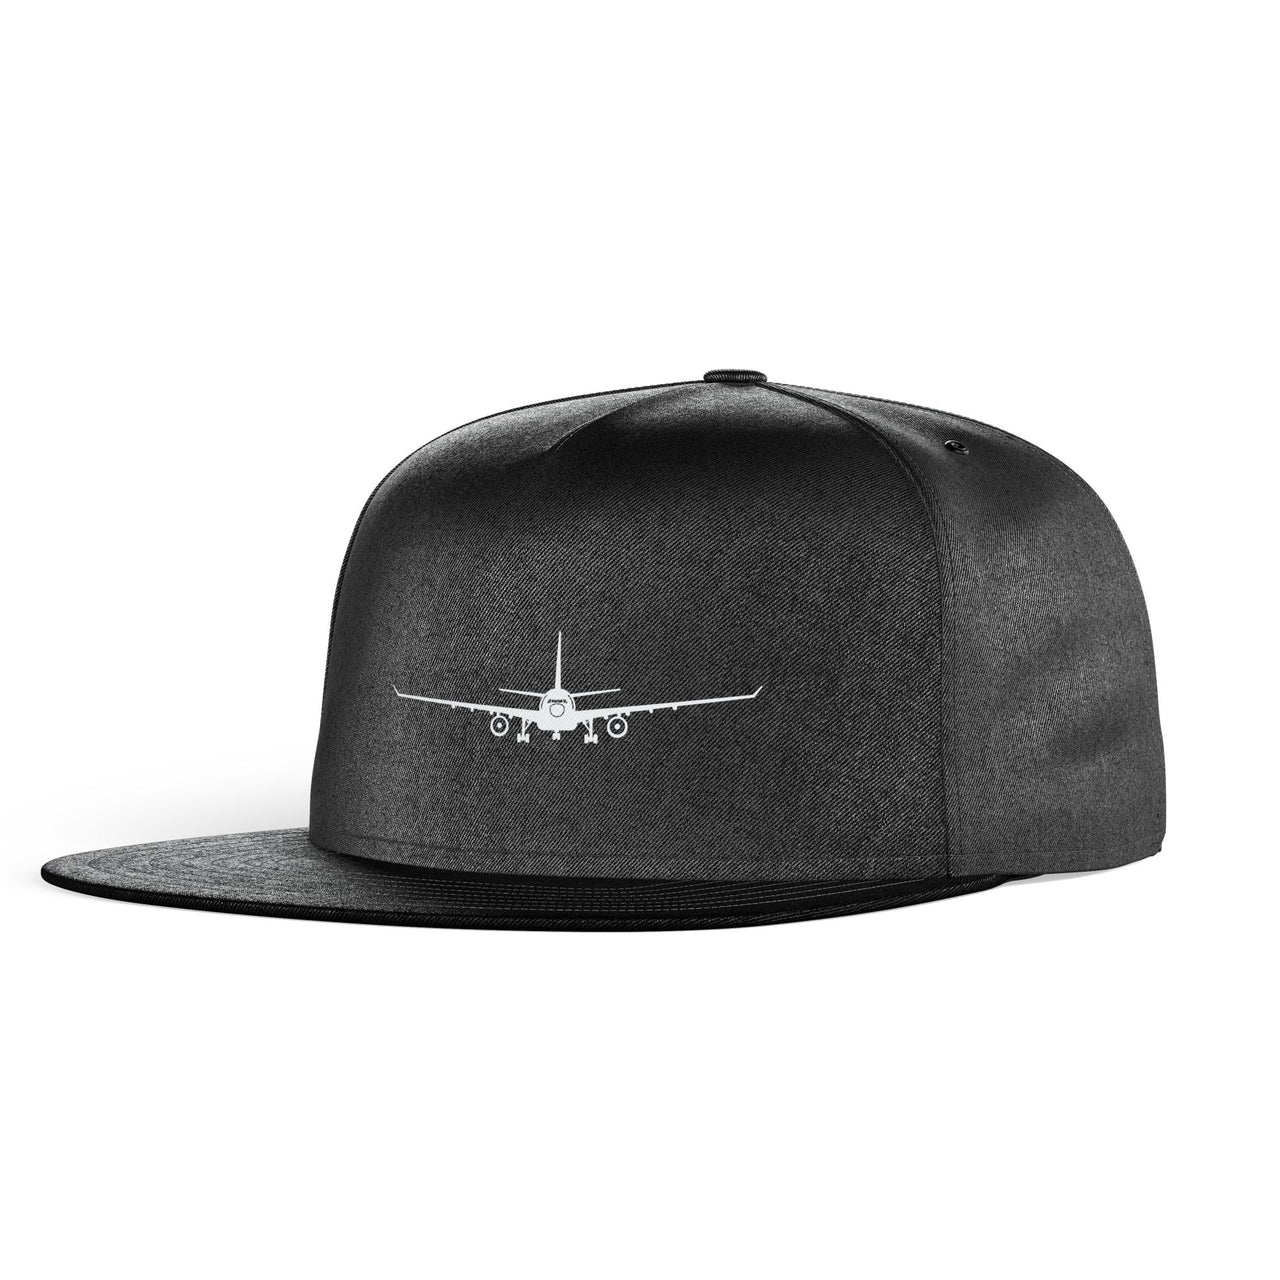 Airbus A330 Silhouette Designed Snapback Caps & Hats